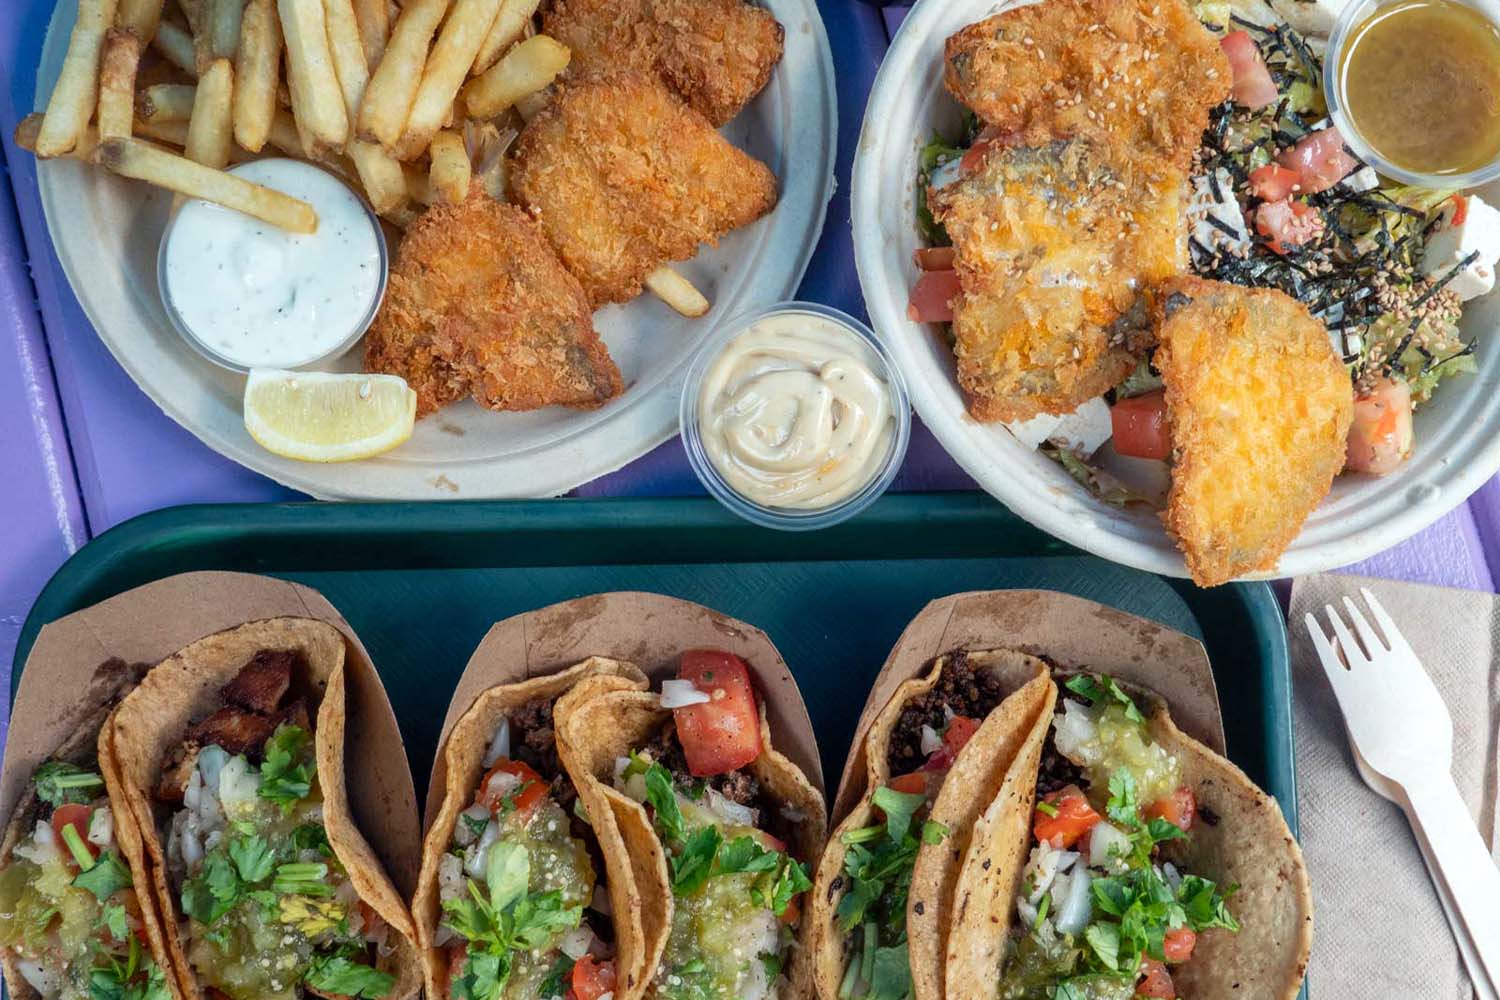 Fish & chips, tacos and salad from Nowadays in Ridgewood, Queens